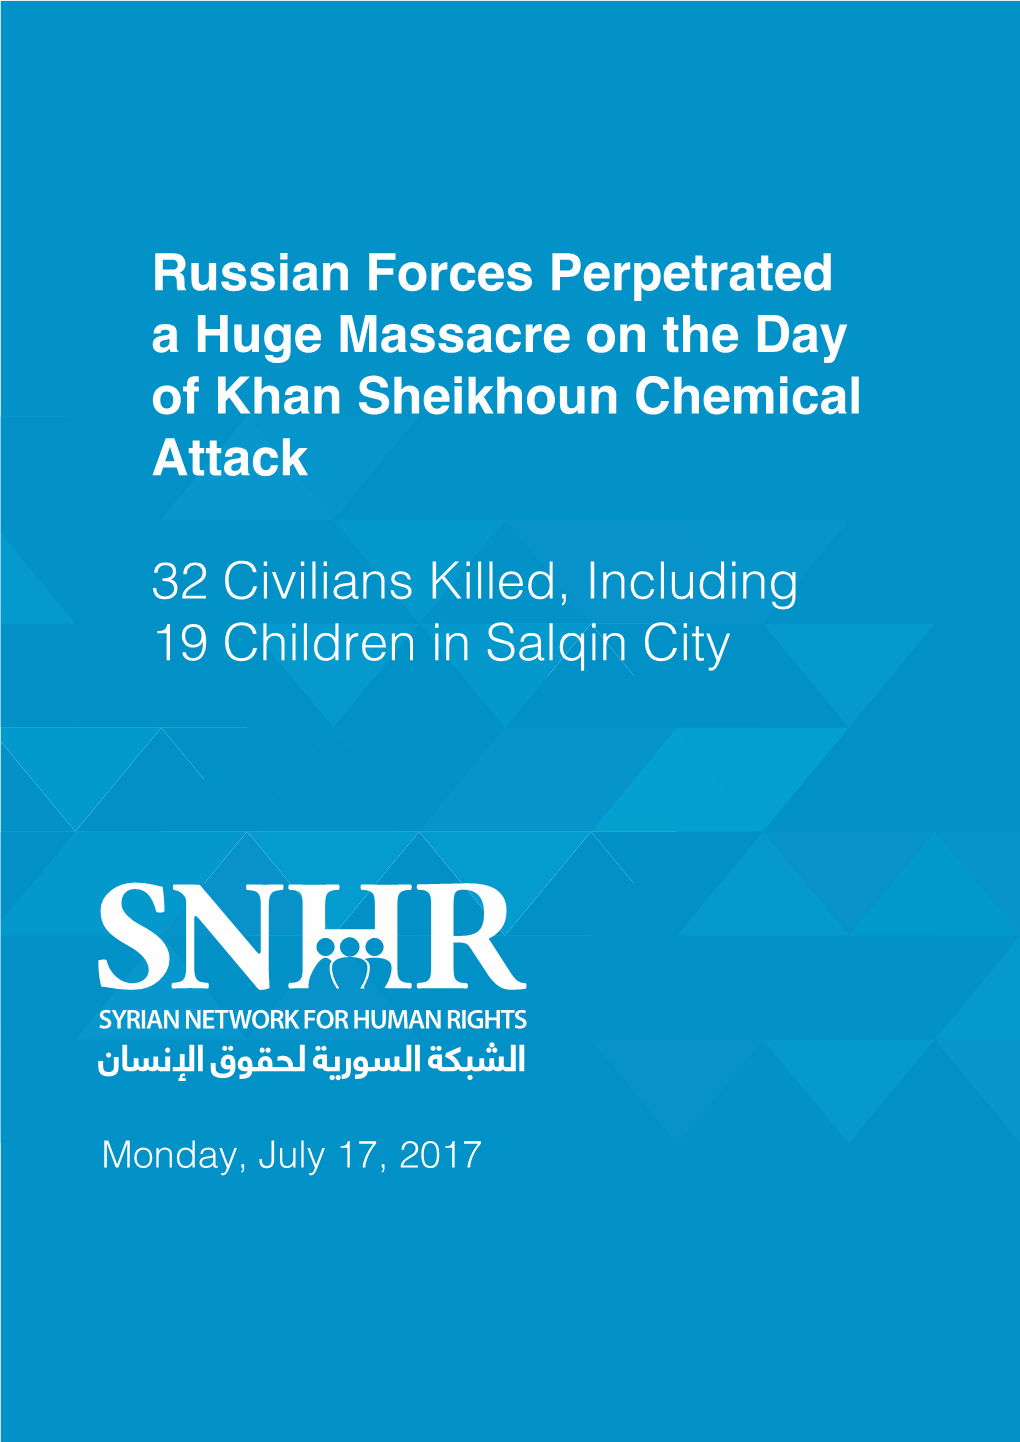 Russian Forces Perpetrated a Huge Massacre on the Day of Khan Sheikhoun Chemical Attack